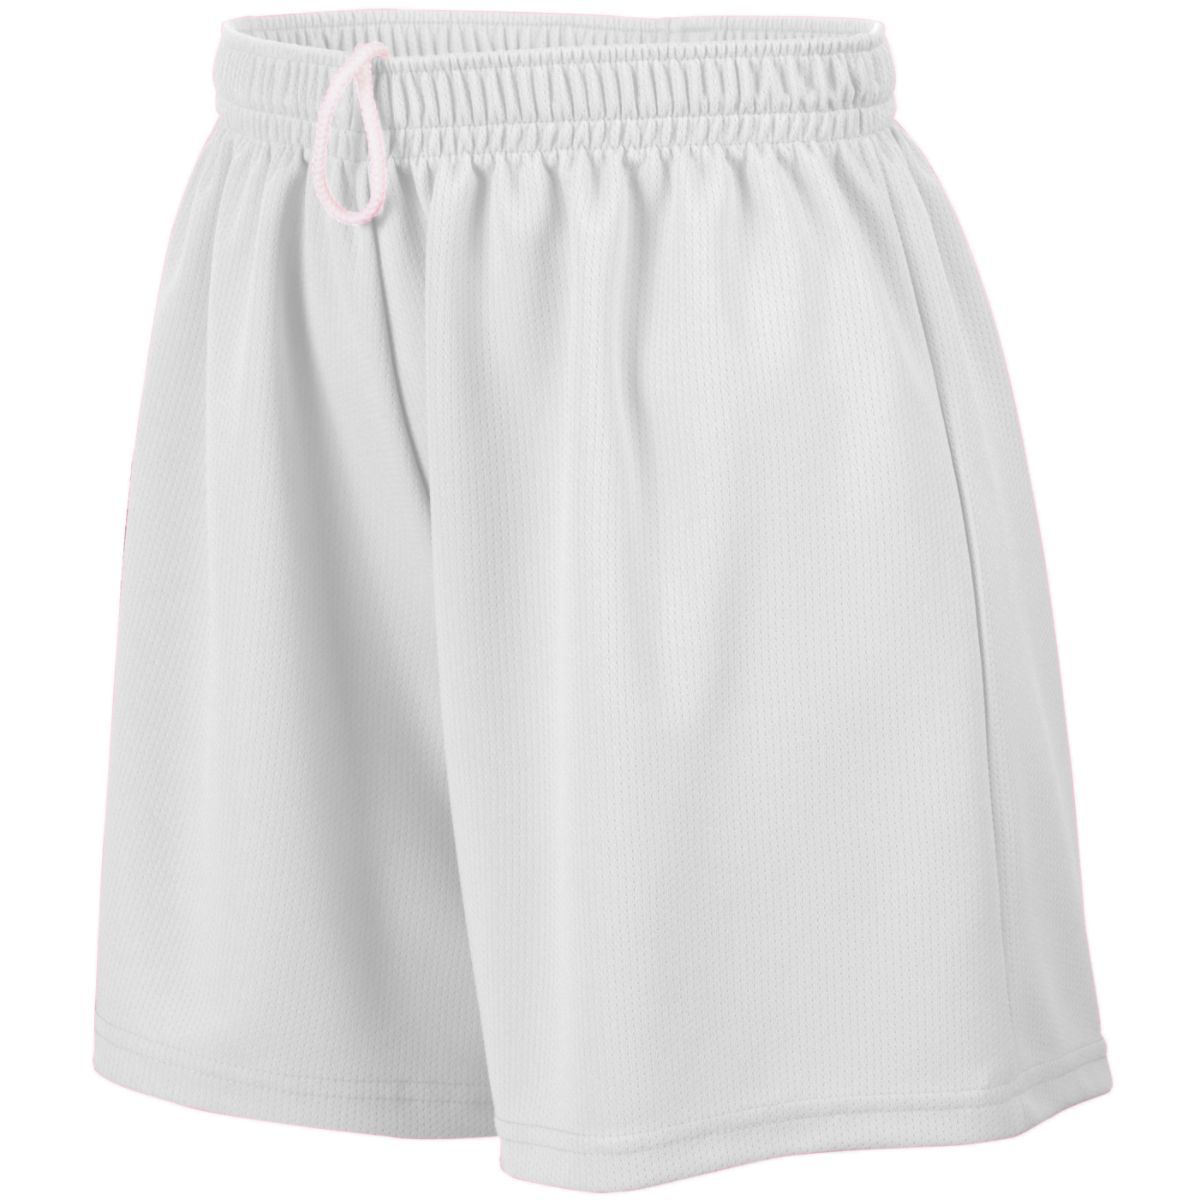 Augusta Sportswear Girls Wicking Mesh Shorts in White  -Part of the Girls, Augusta-Products, Lacrosse, Girls-Shorts, All-Sports, All-Sports-1 product lines at KanaleyCreations.com